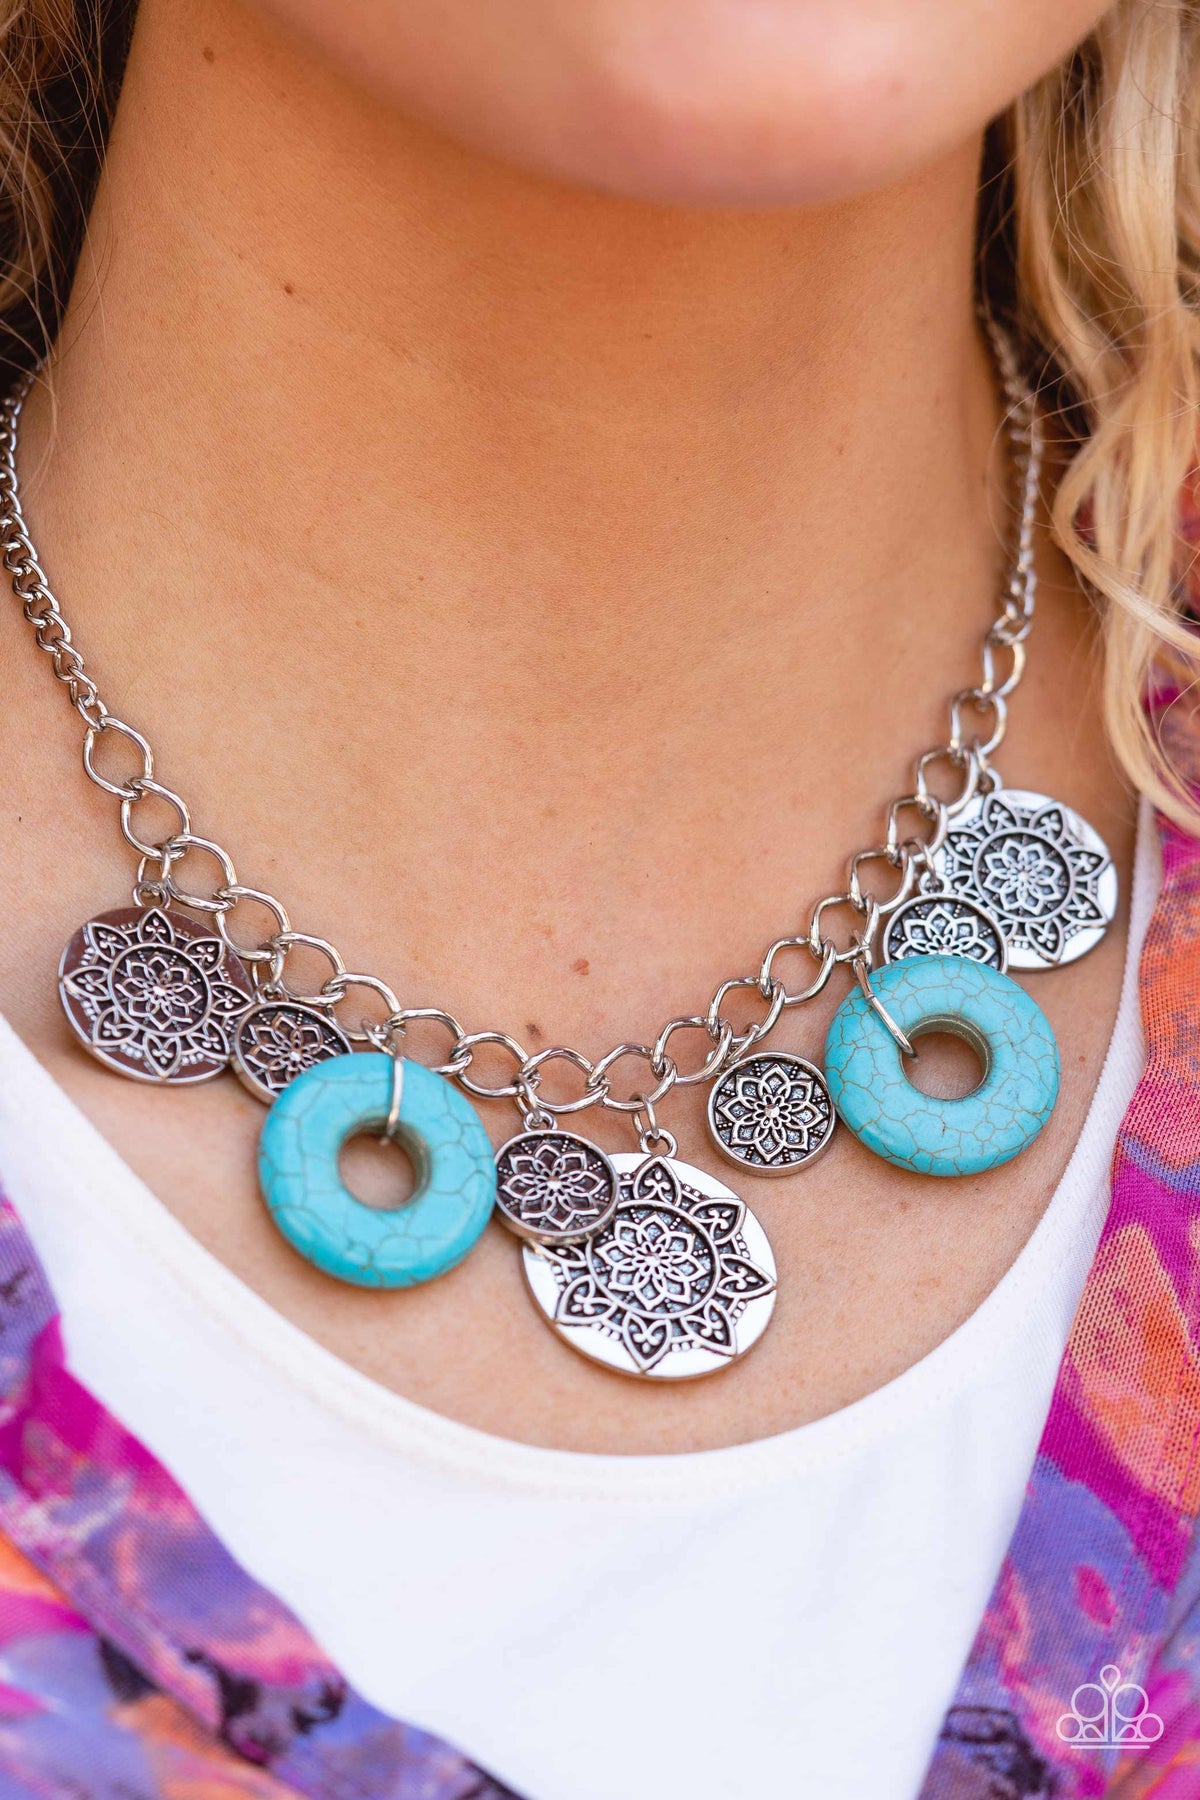 Western Zen Turquoise Blue Stone Necklace - Paparazzi Accessories-on model - CarasShop.com - $5 Jewelry by Cara Jewels